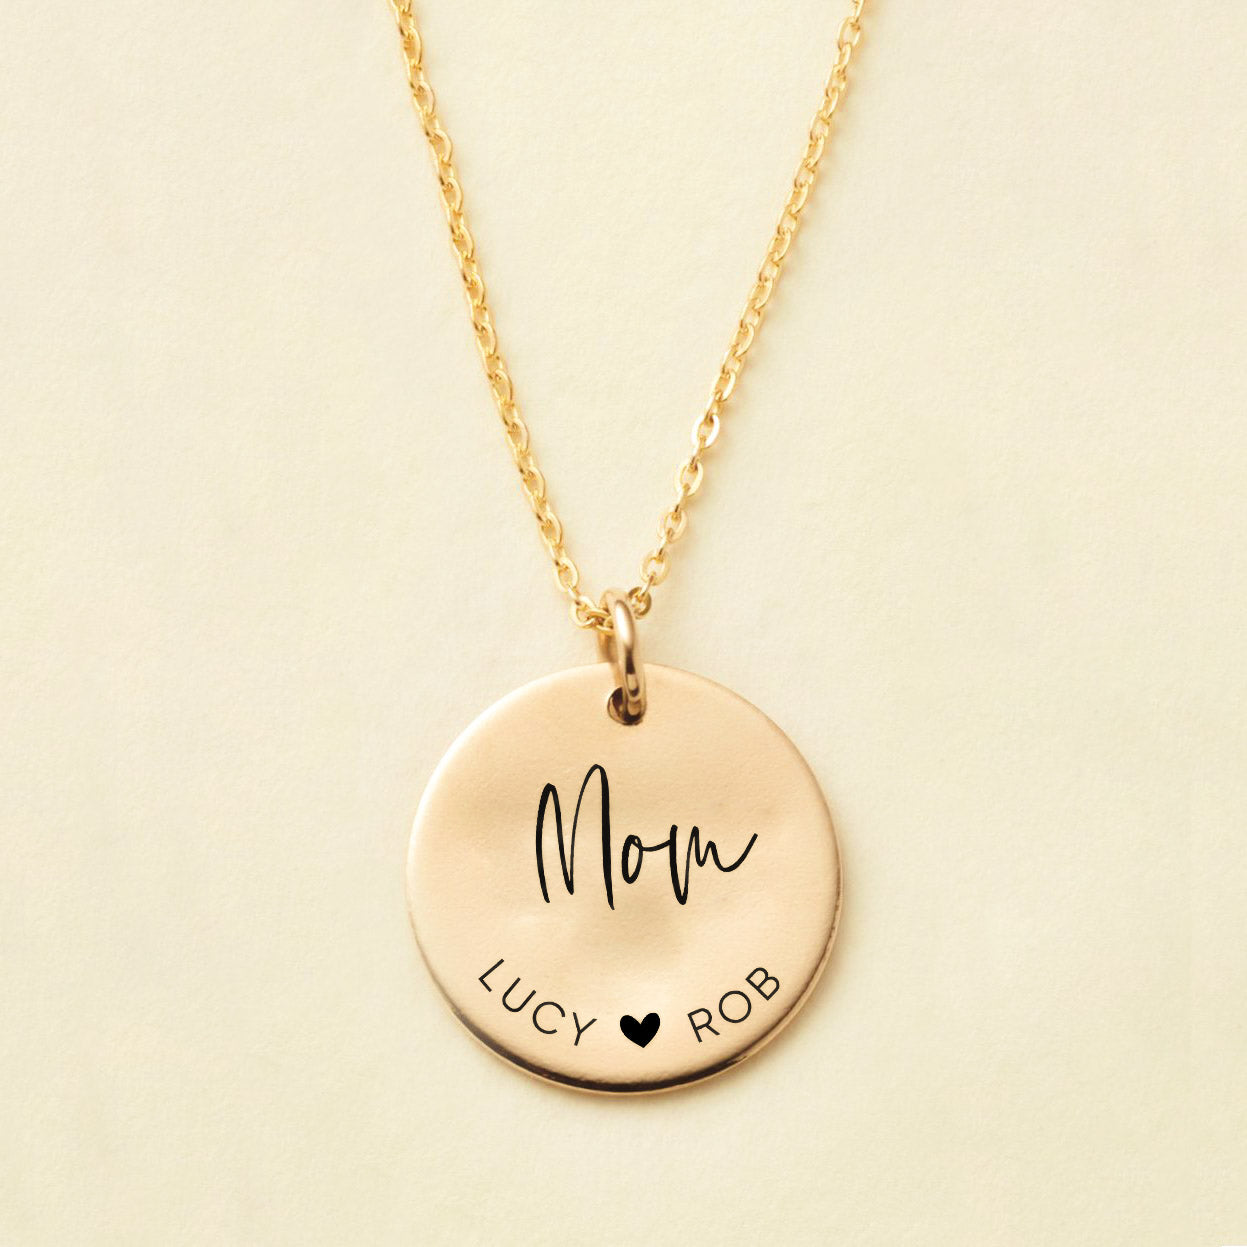 Mothers day free items with free shiping Silver Plated Necklace